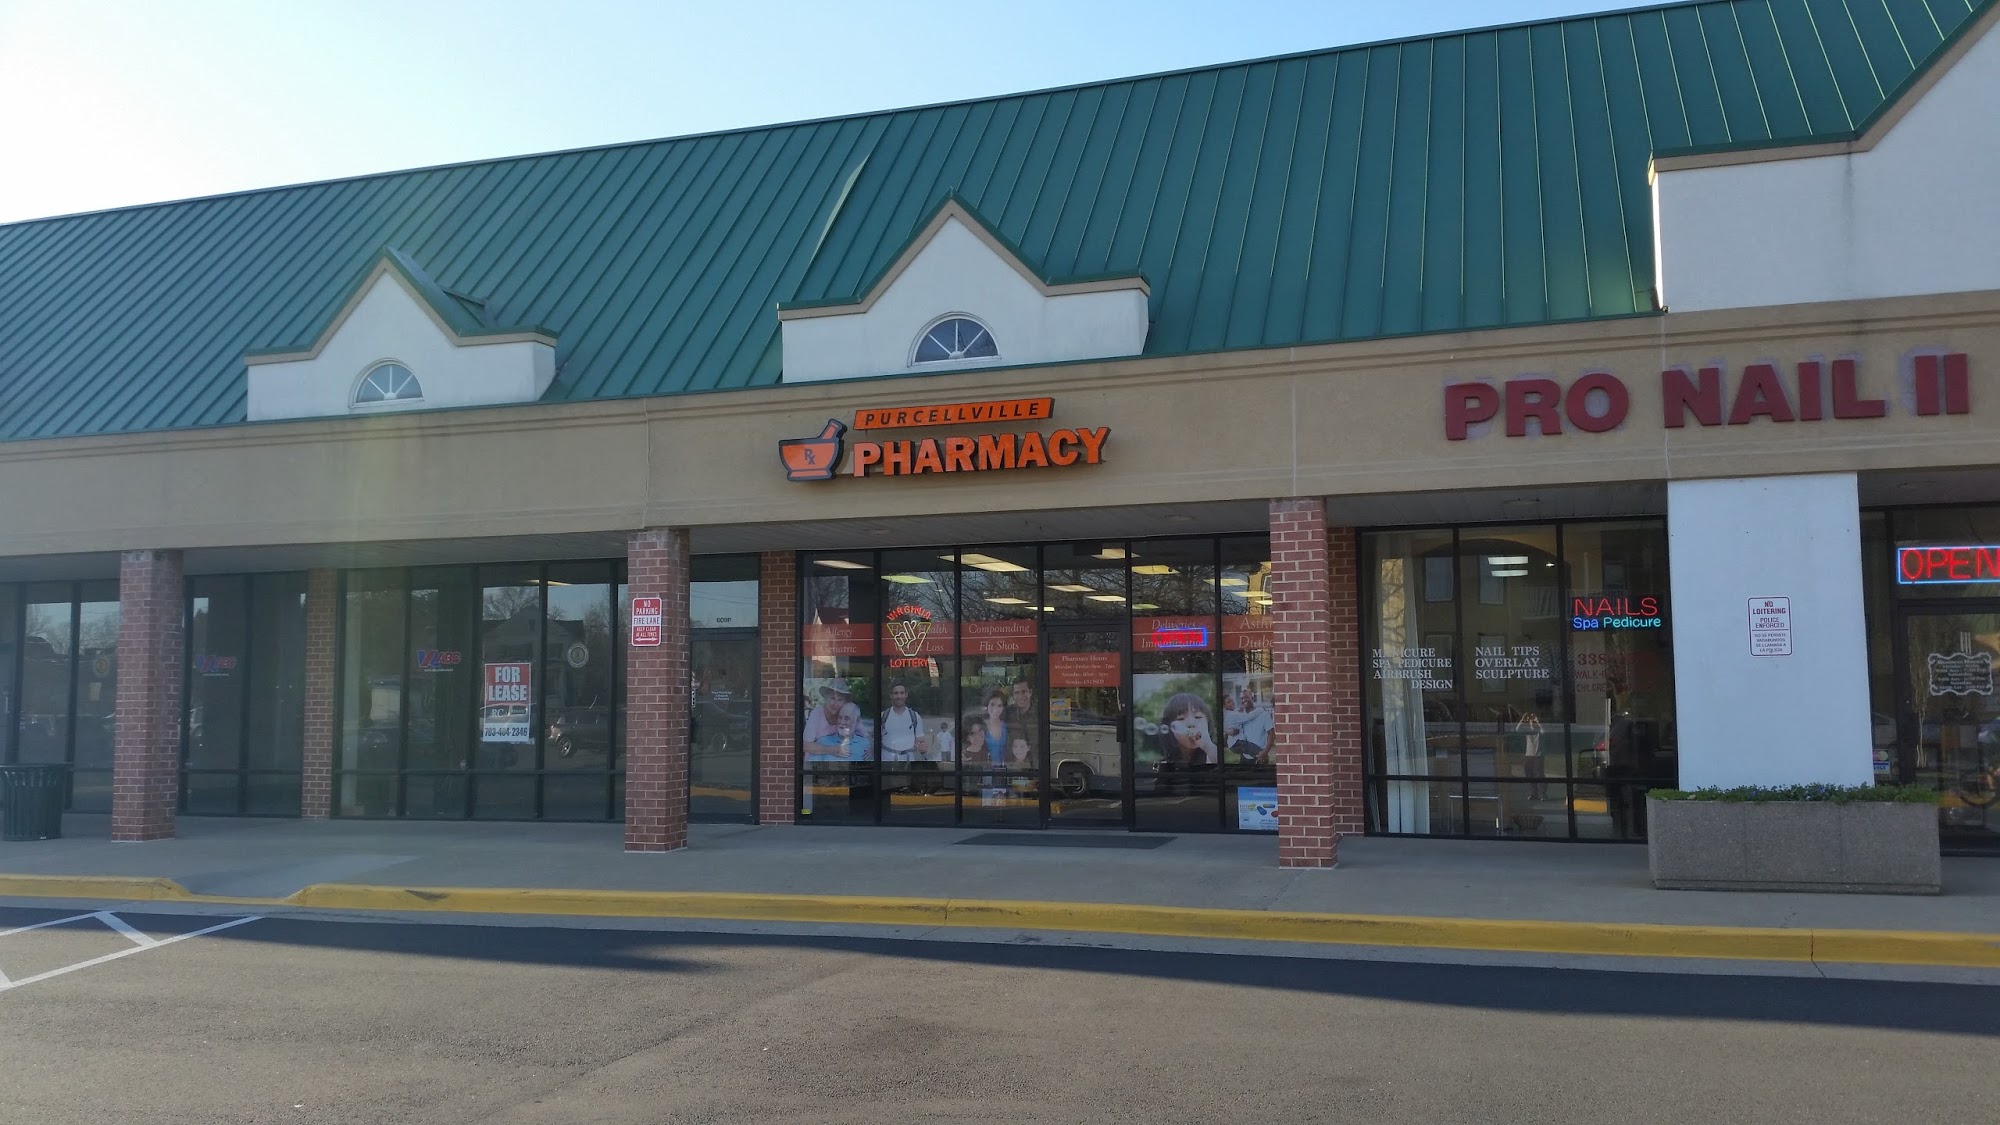 PURCELLVILLE PHARMACY